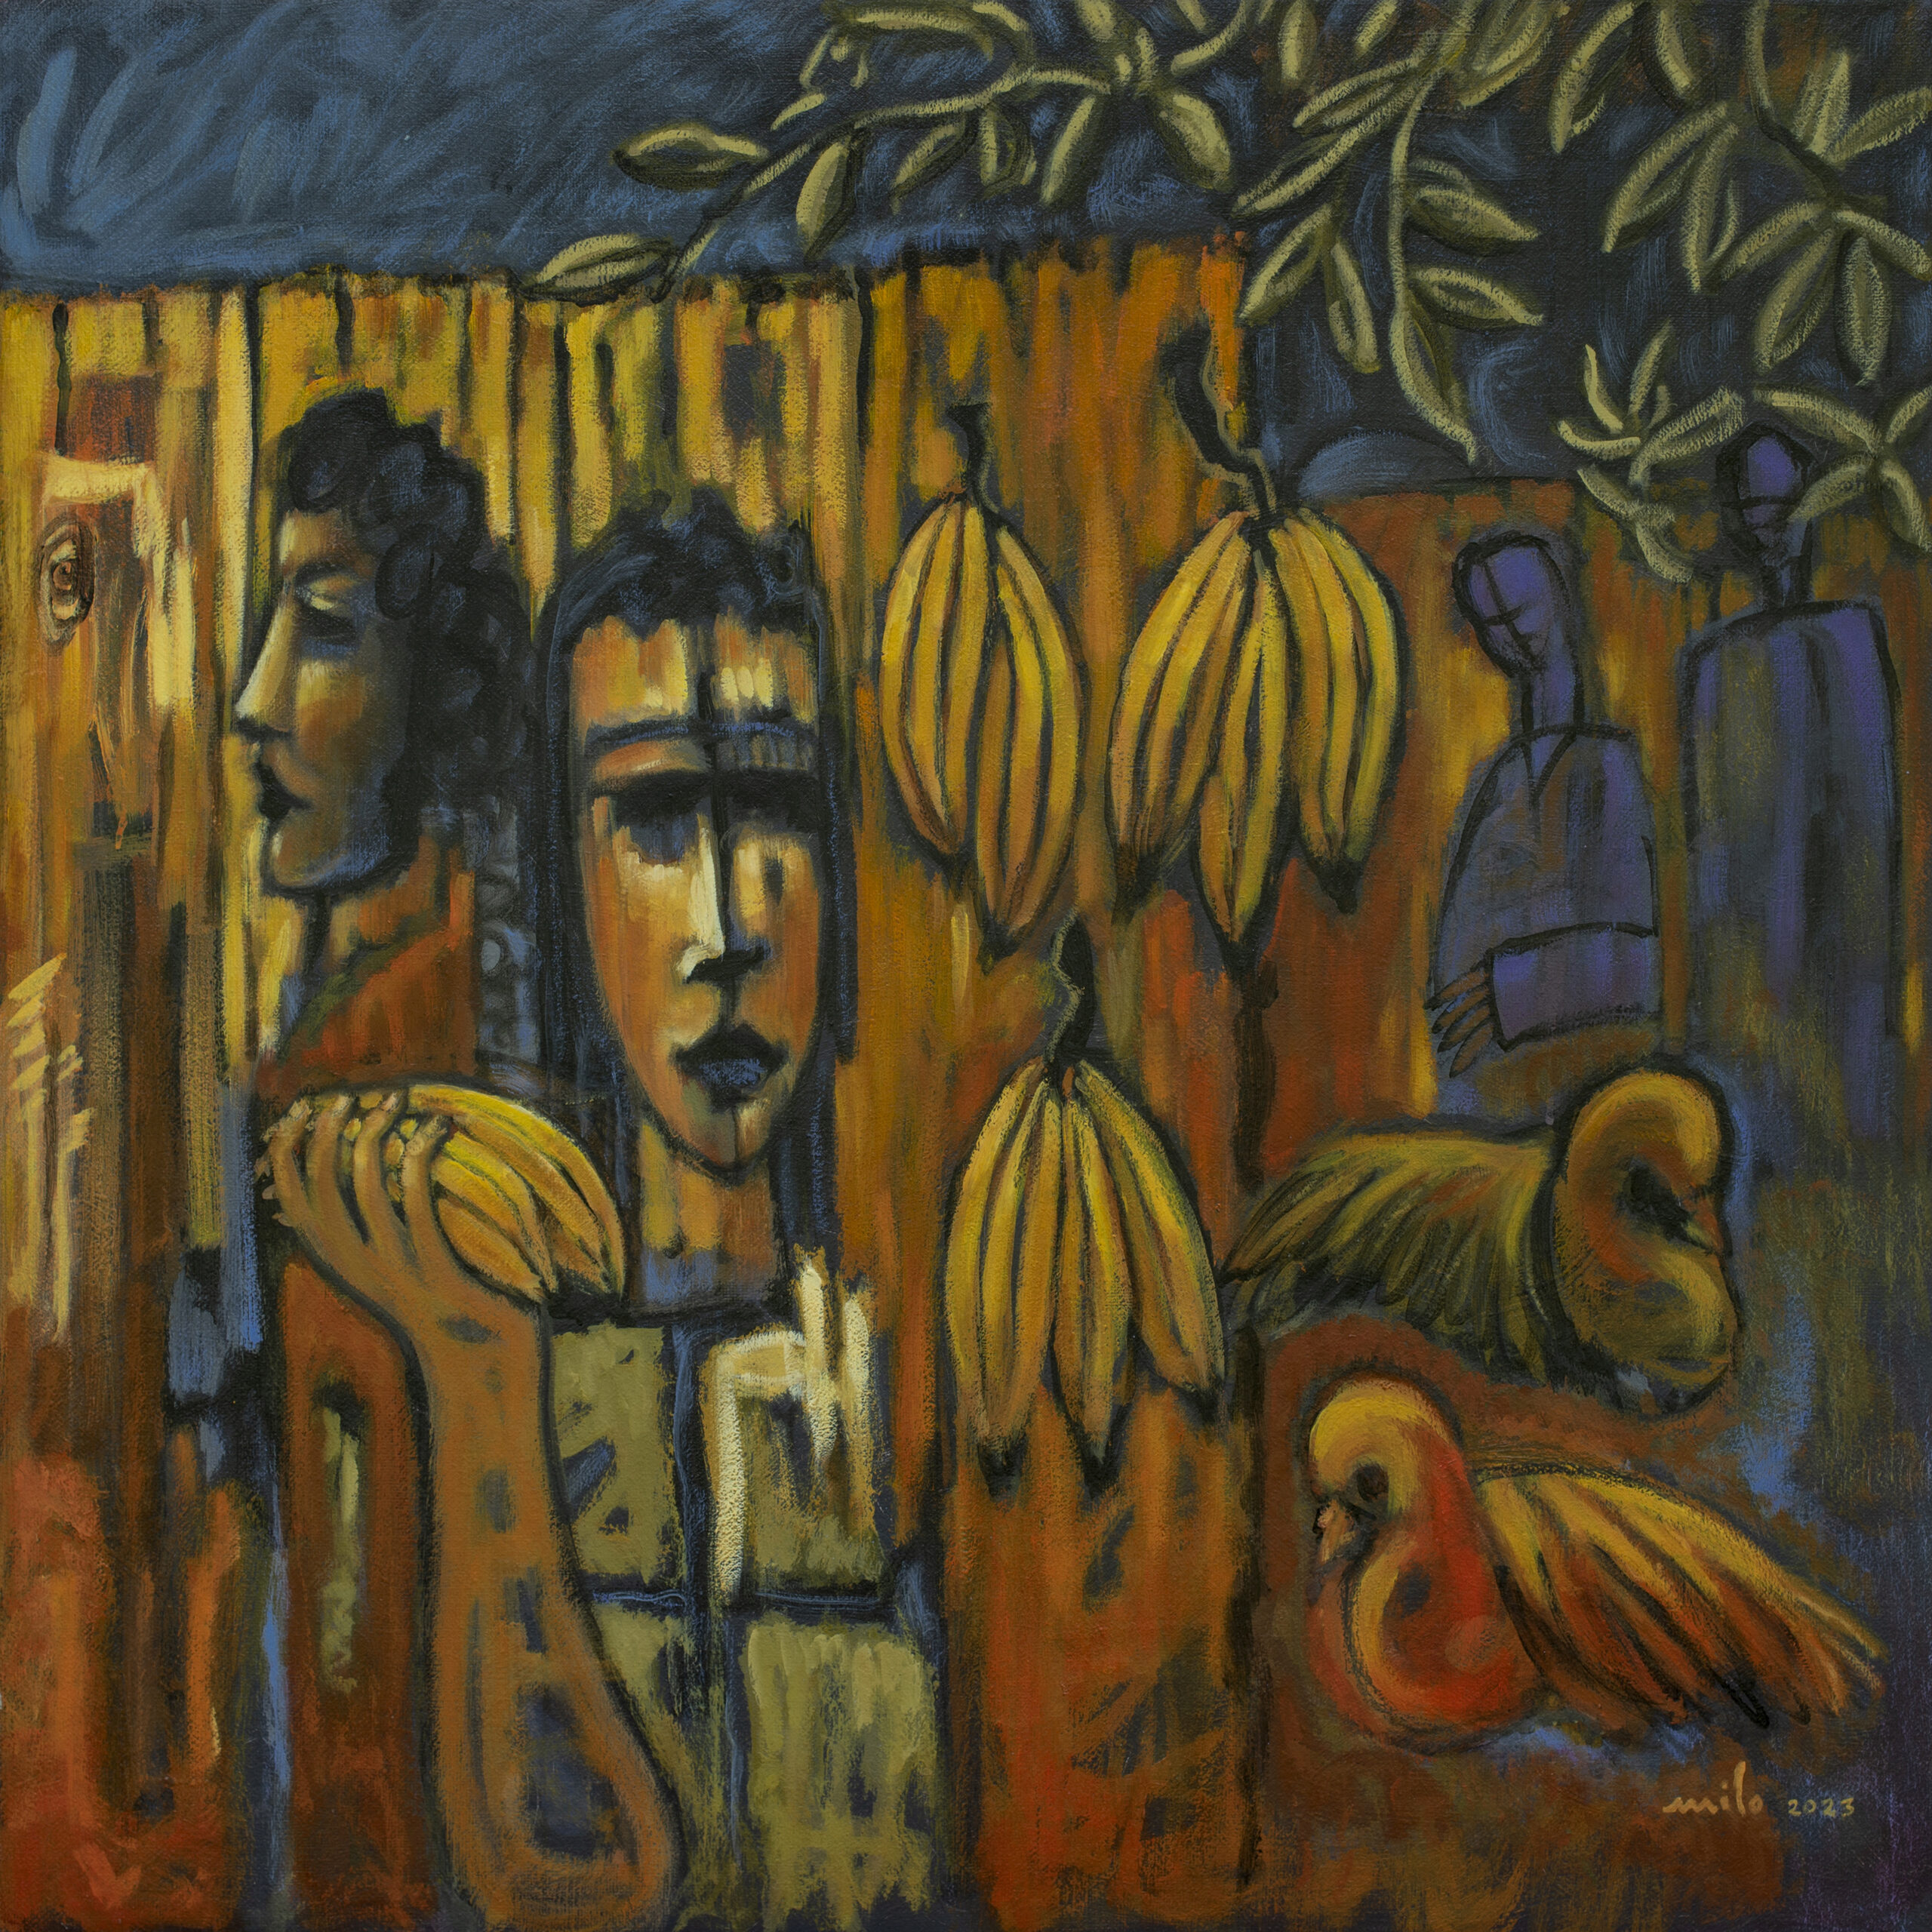 A rustic Costa Rican market painting by Milo Gonzalez, featuring plantain sellers.